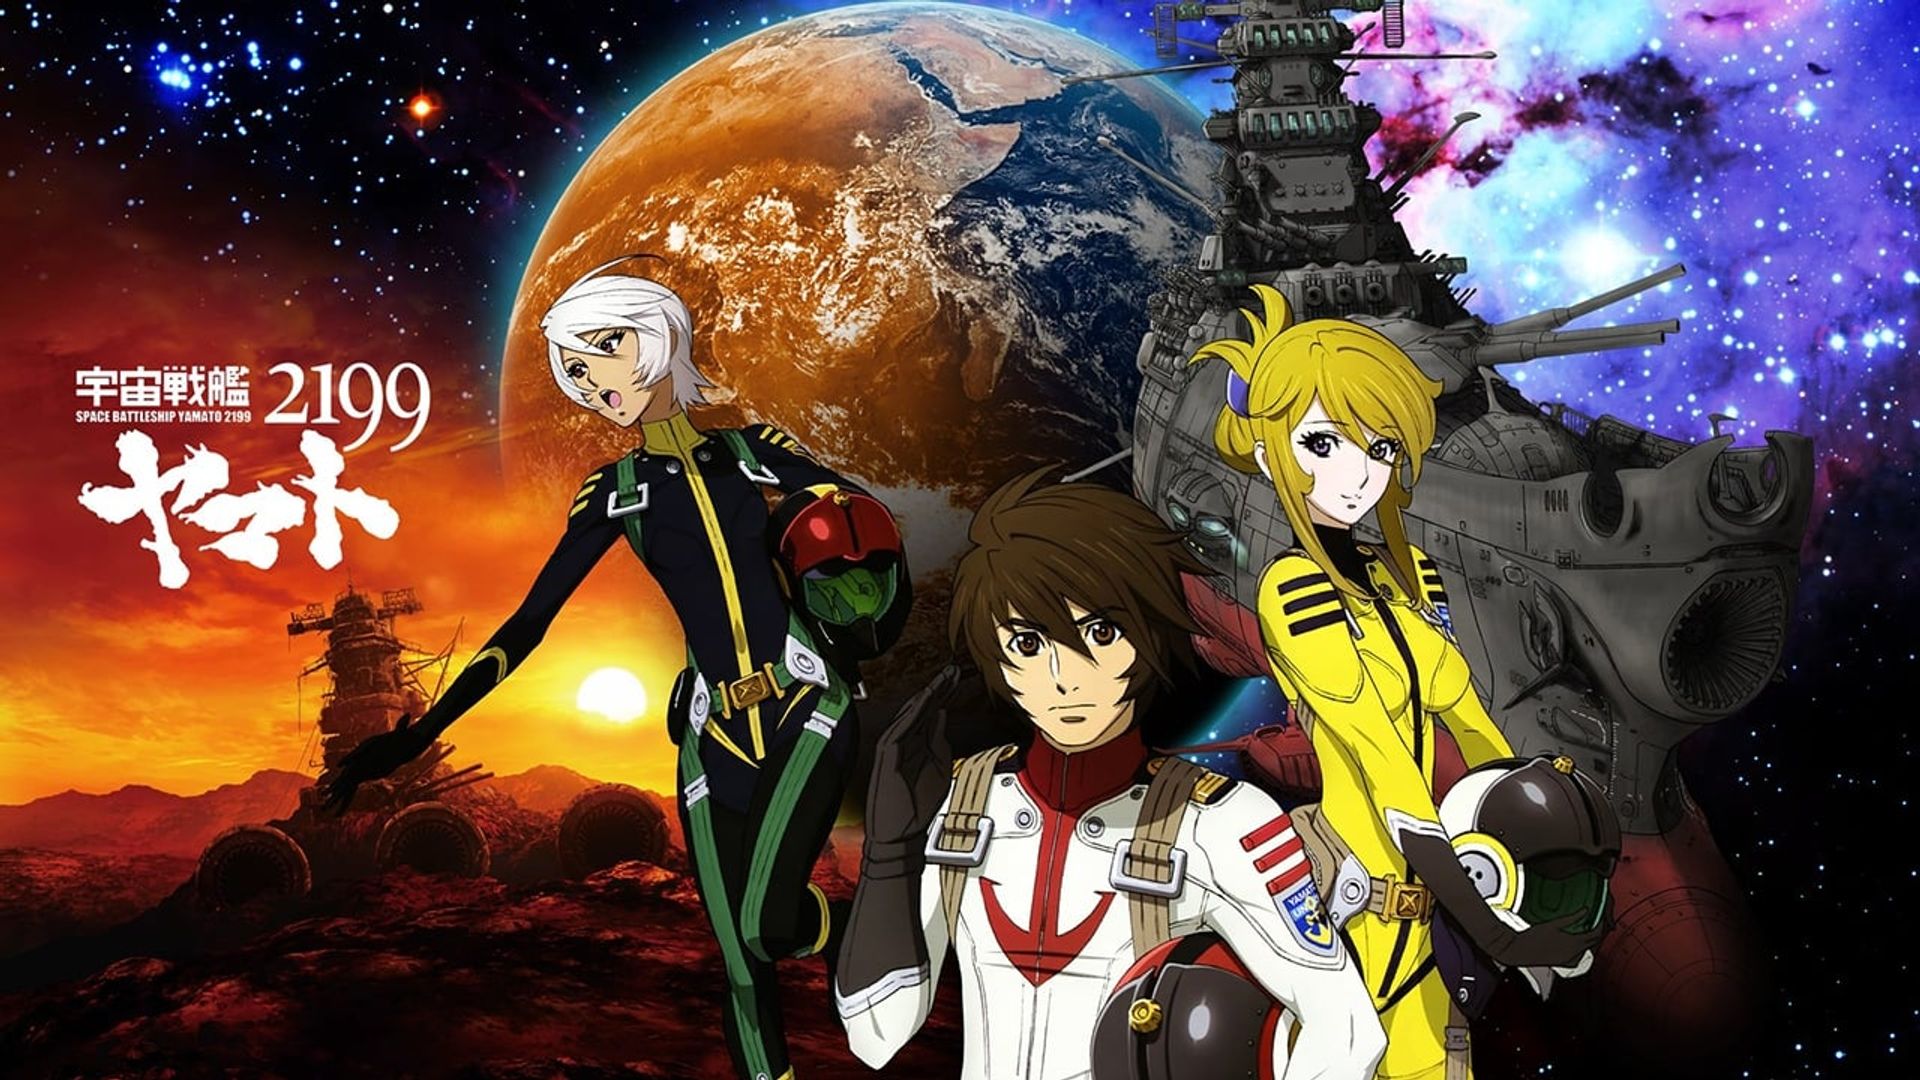 Star Blazers 2199: A Voyage to Remember background